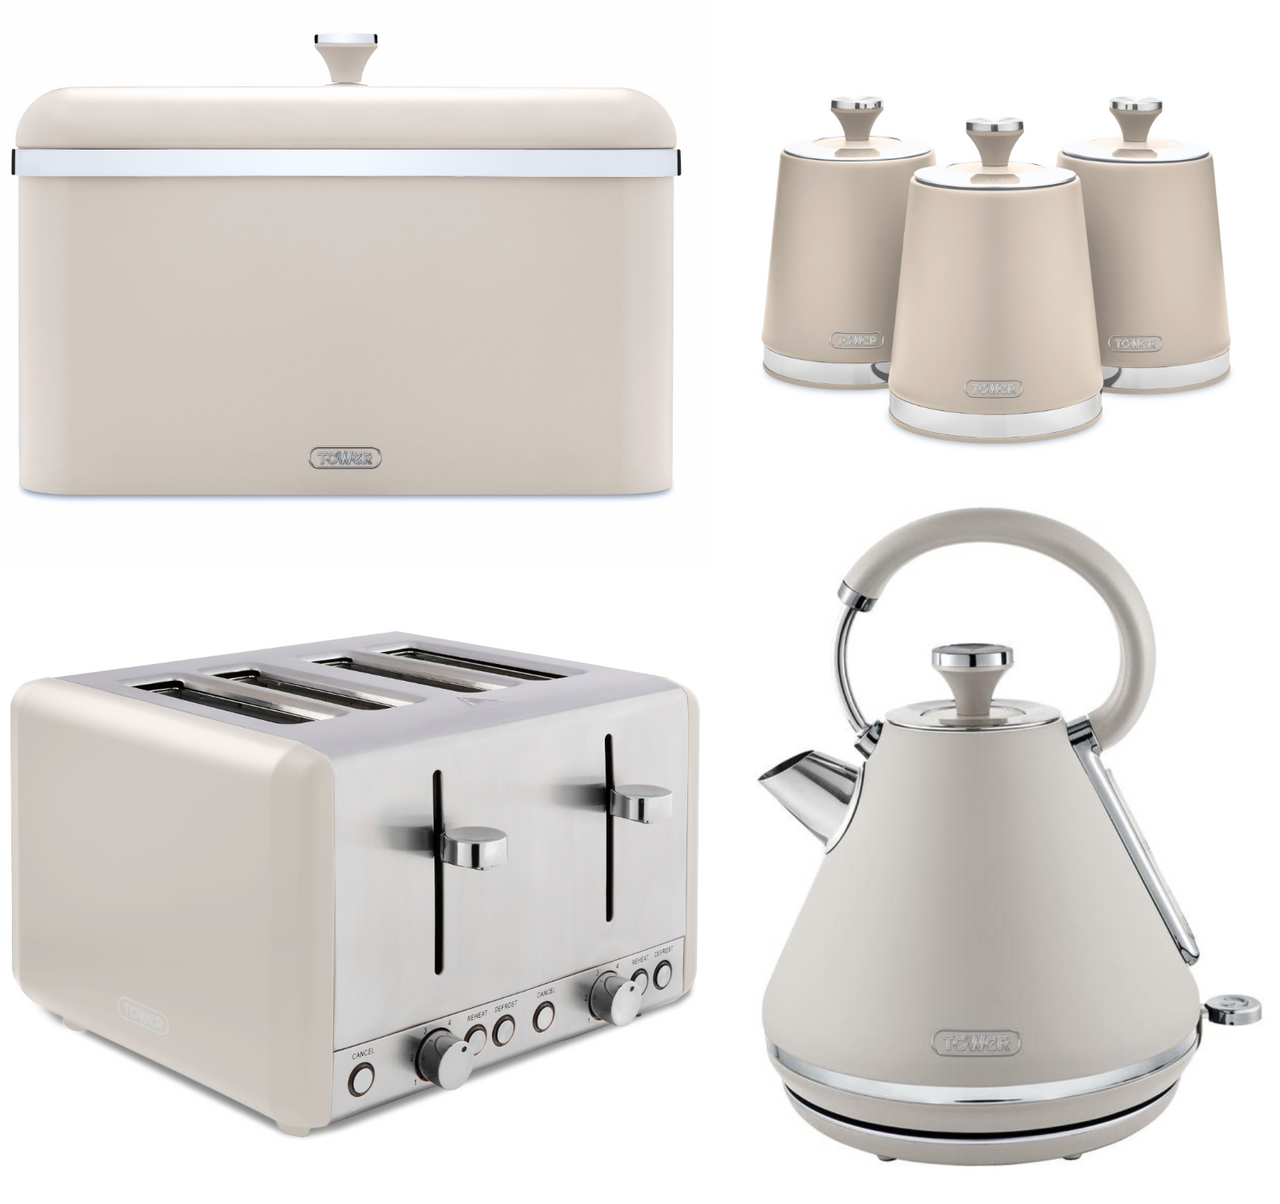 Tower Cavaletto Pyramid Kettle, 4 Slice Toaster, Bread Bin & Canisters Matching Set in Latte with Chrome Accents